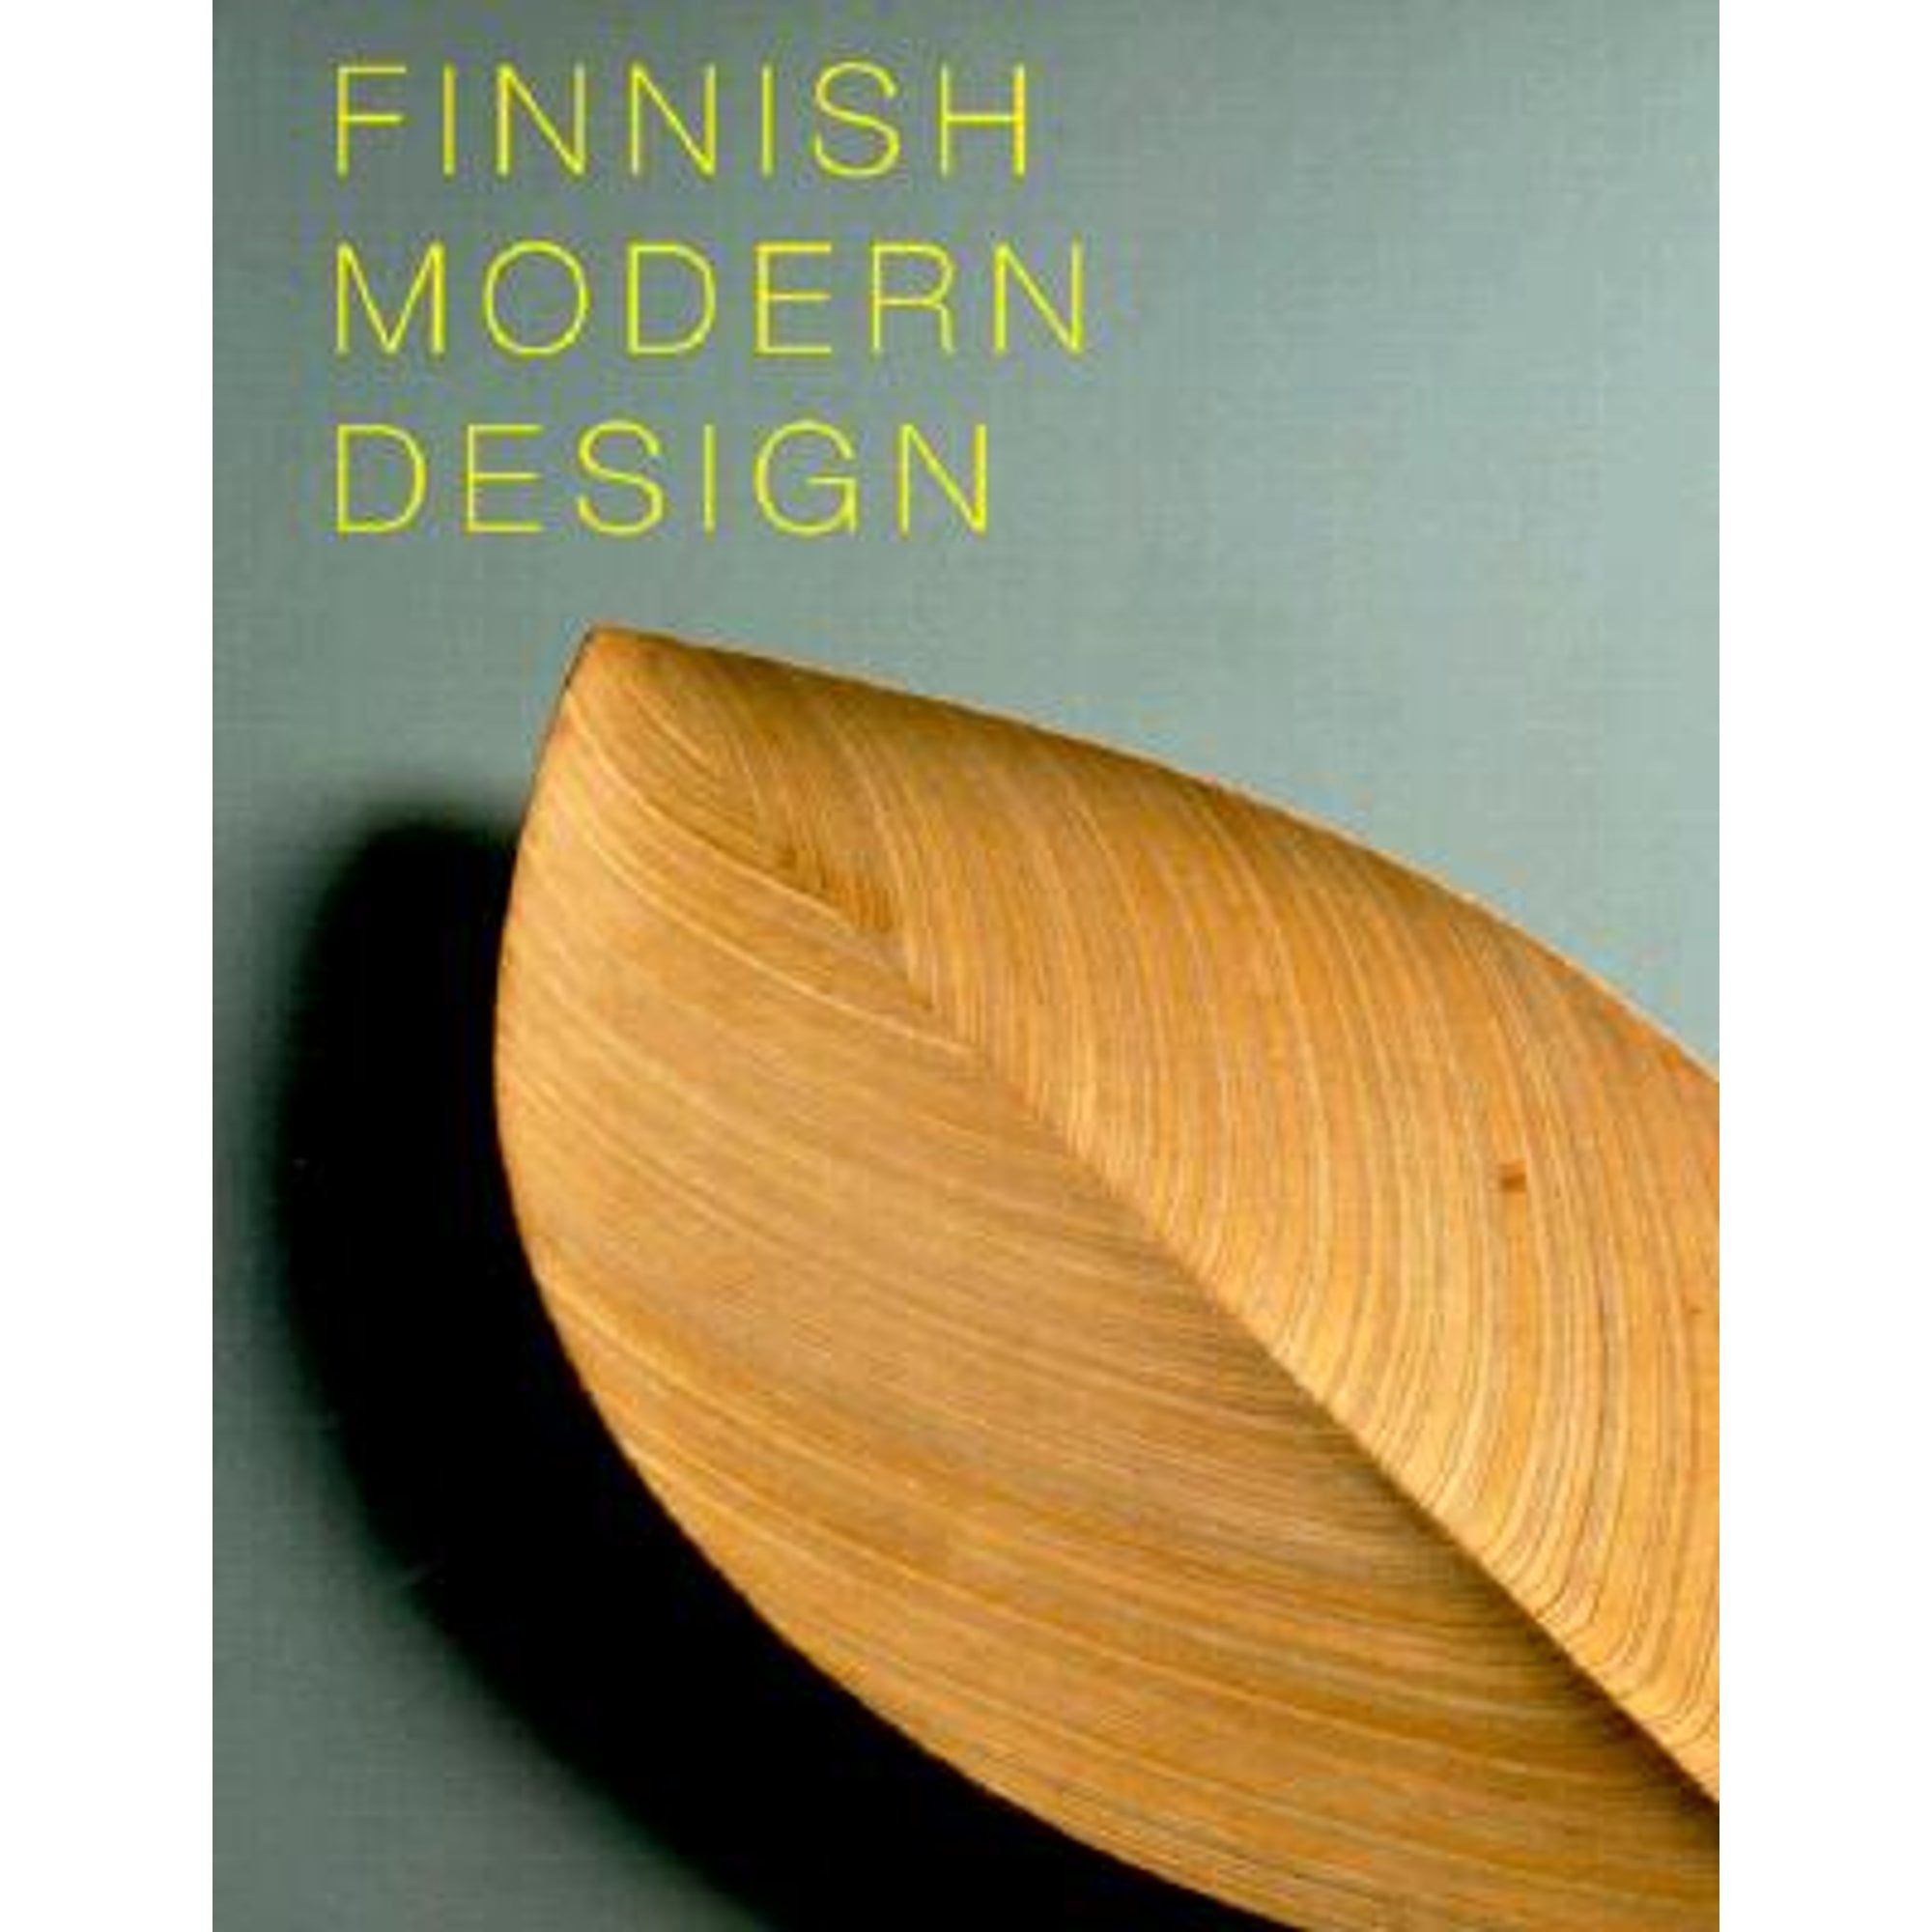 Pre-Owned Finnish Modern Design: Utopian Ideals and Everyday Realities, 1930-97 (Paperback 9780300082807) by Ms. Marianne Aav, Nina Stritzler-Levine